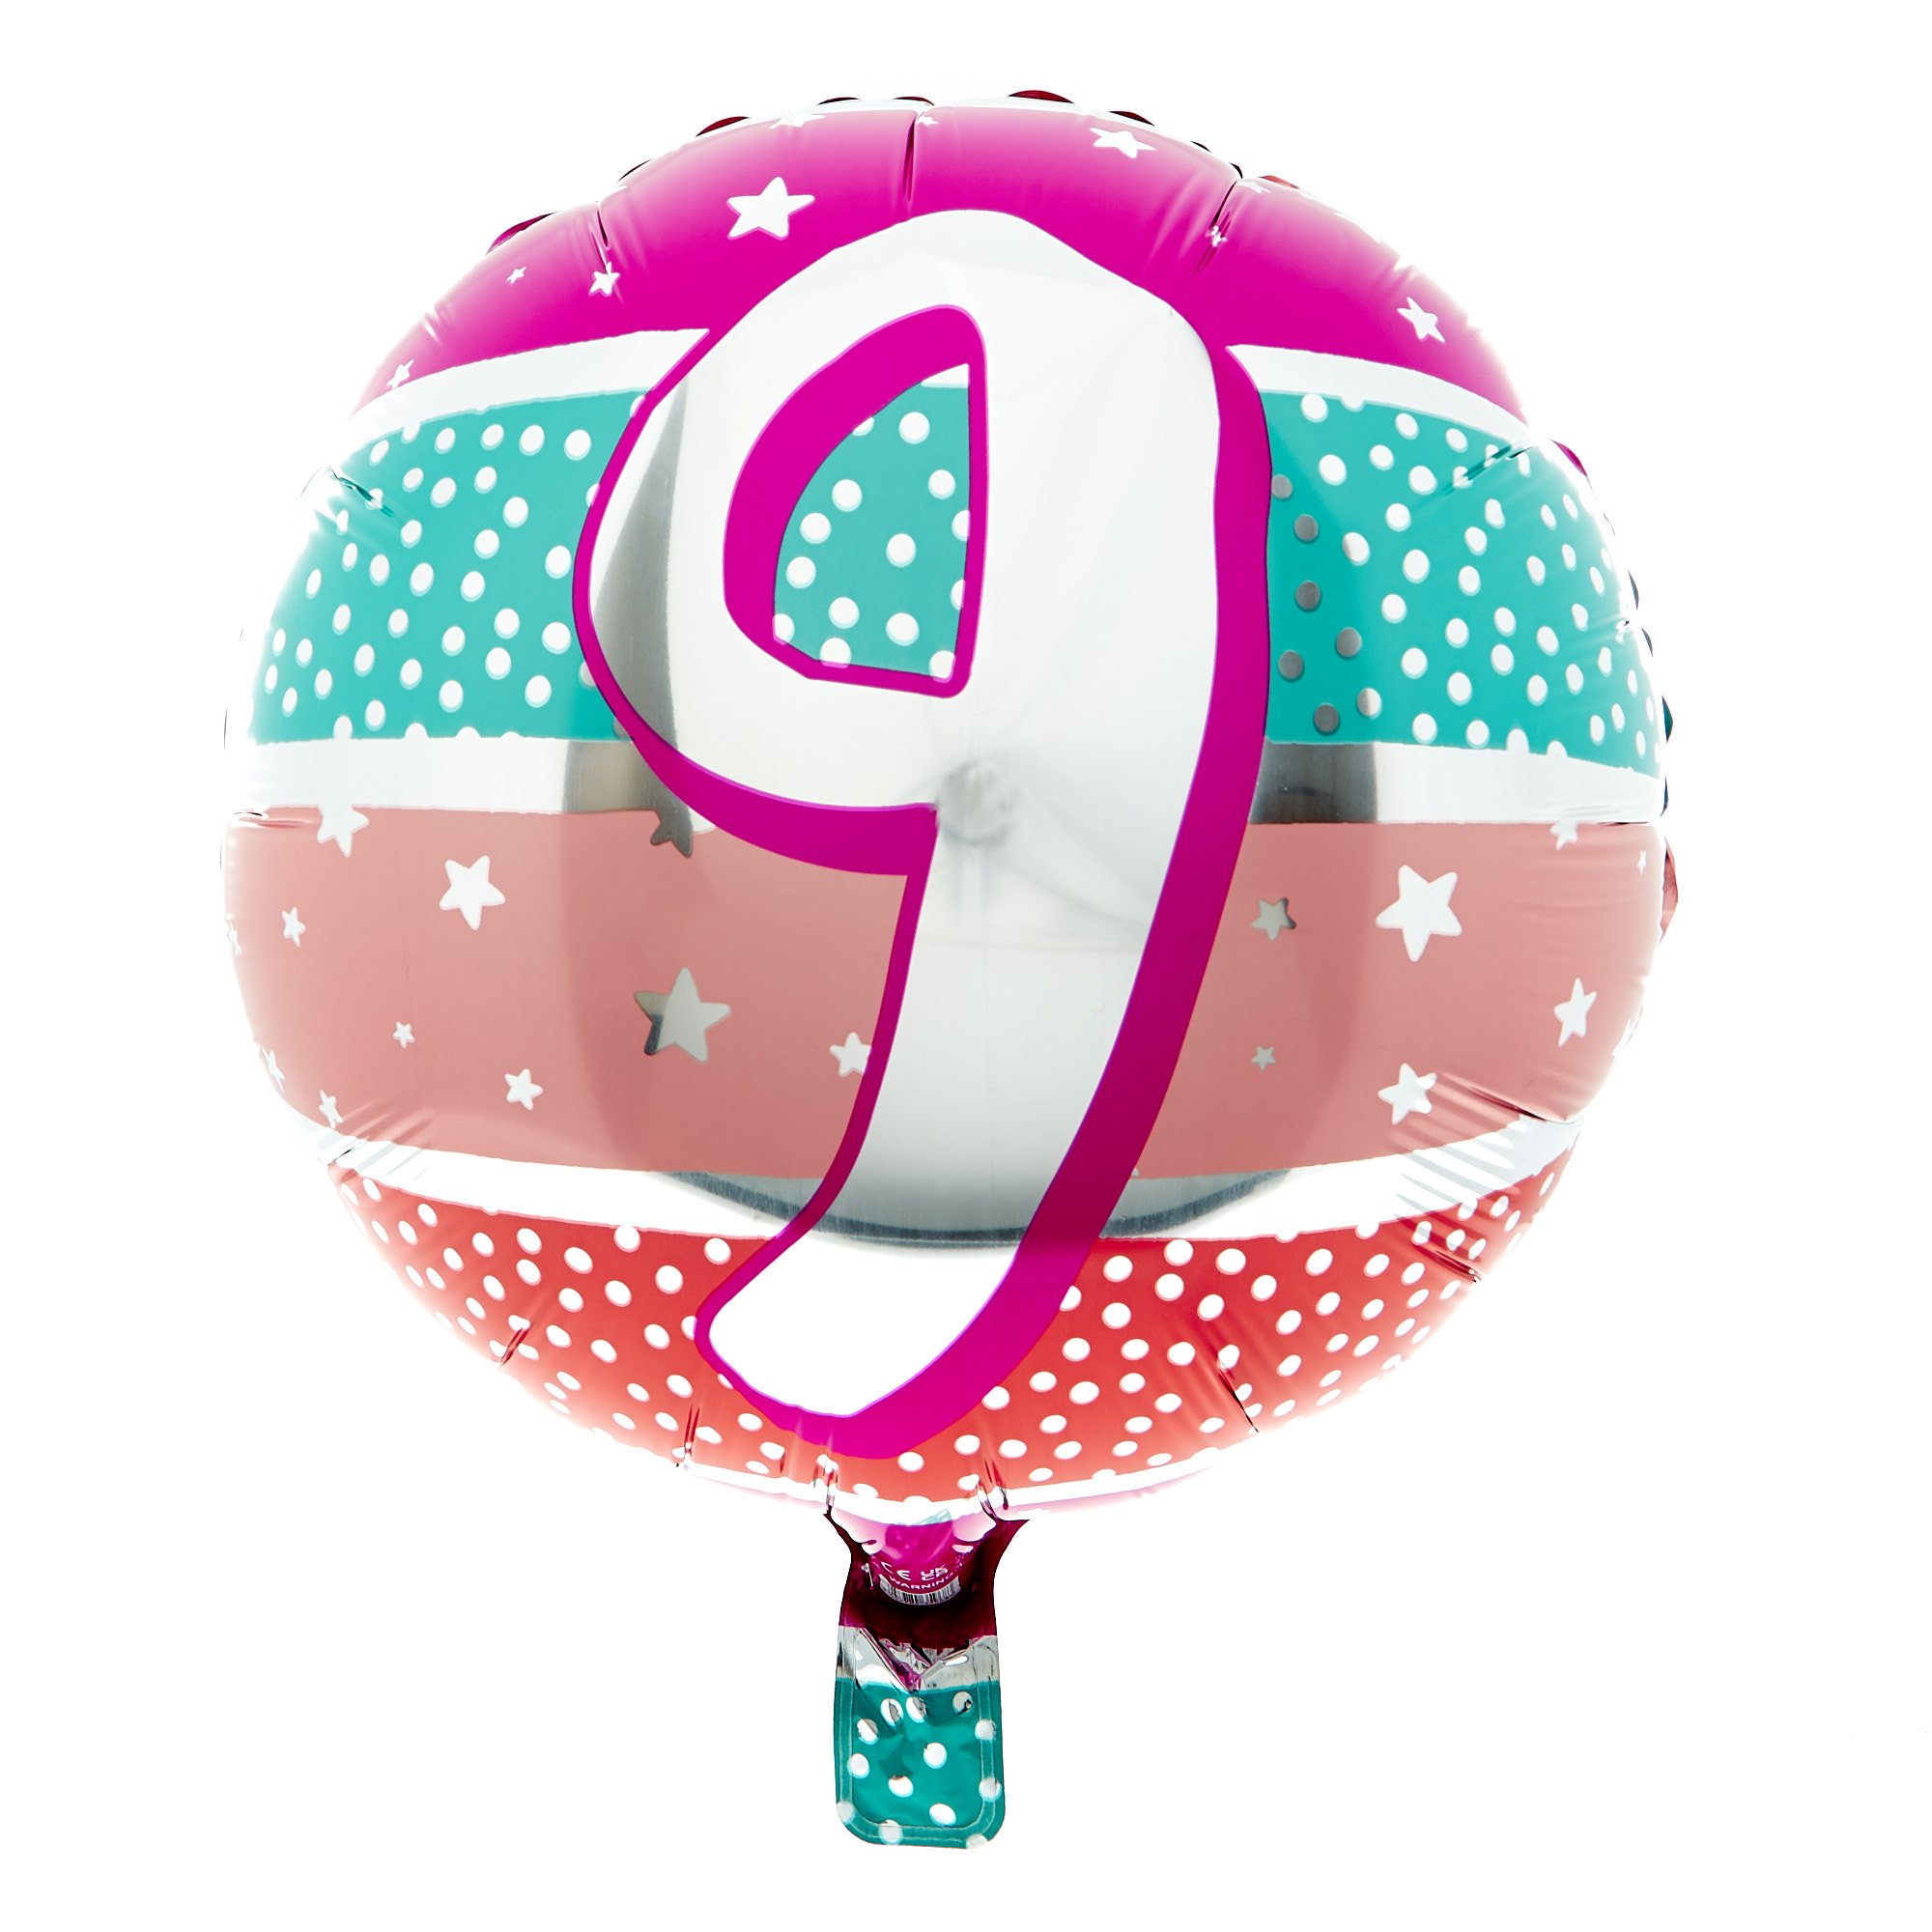 Spots & Stars 9th Birthday Balloon Bouquet - DELIVERED INFLATED!